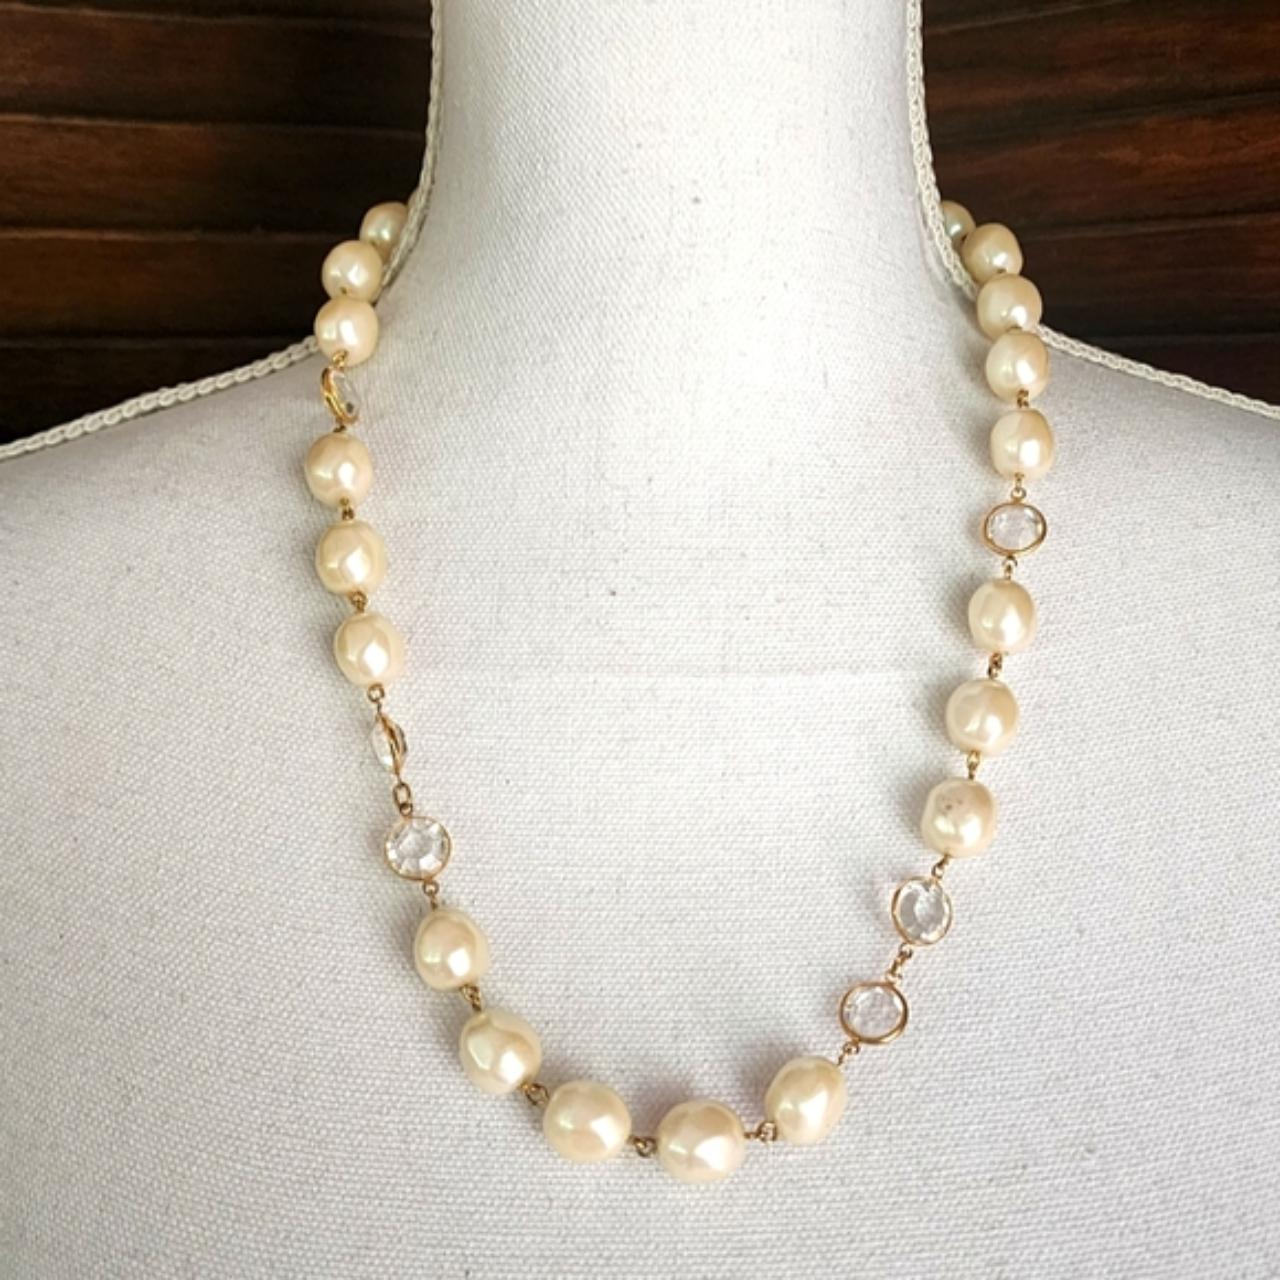 Vintage Givenchy Logo Faux Pearl 39” Long Necklace C 1970's | eBay